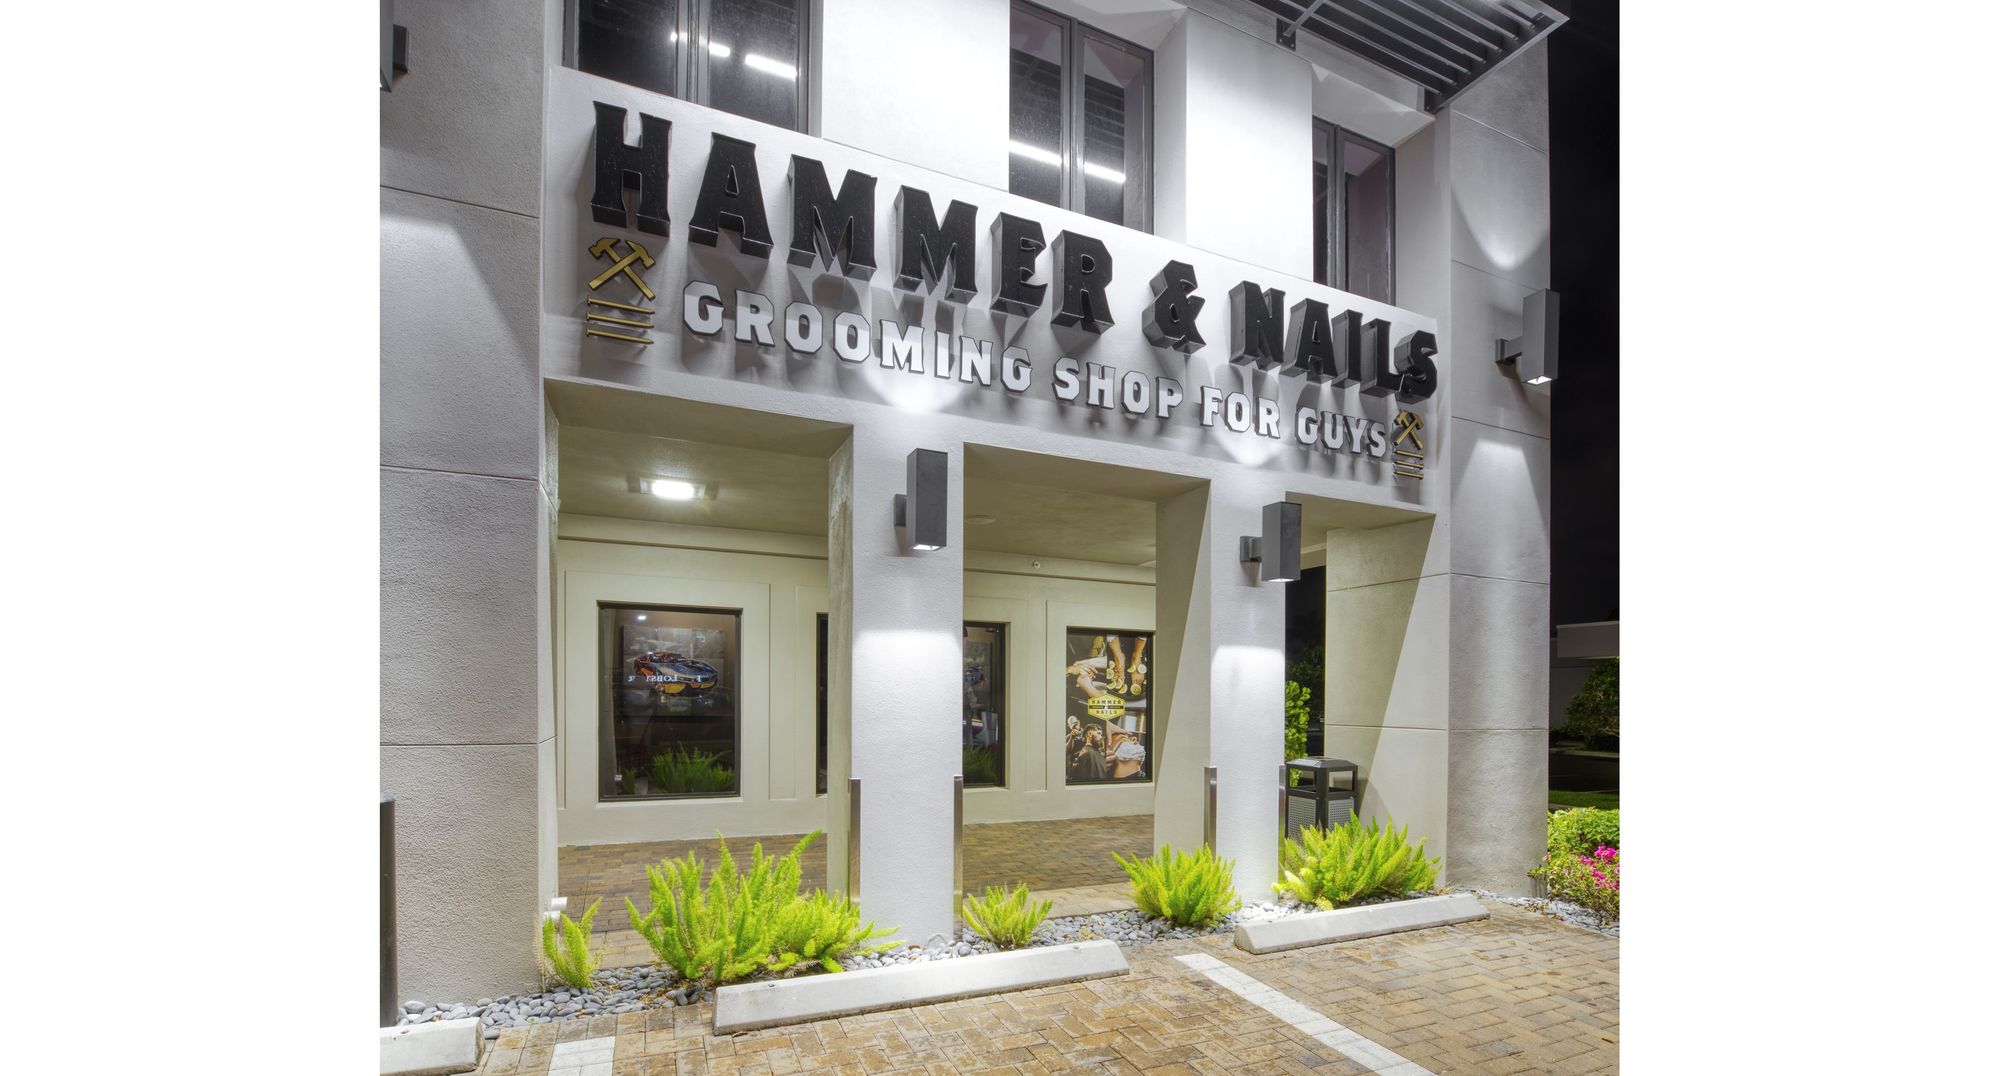 Luxury Grooming for Guys - Hammer & Nails